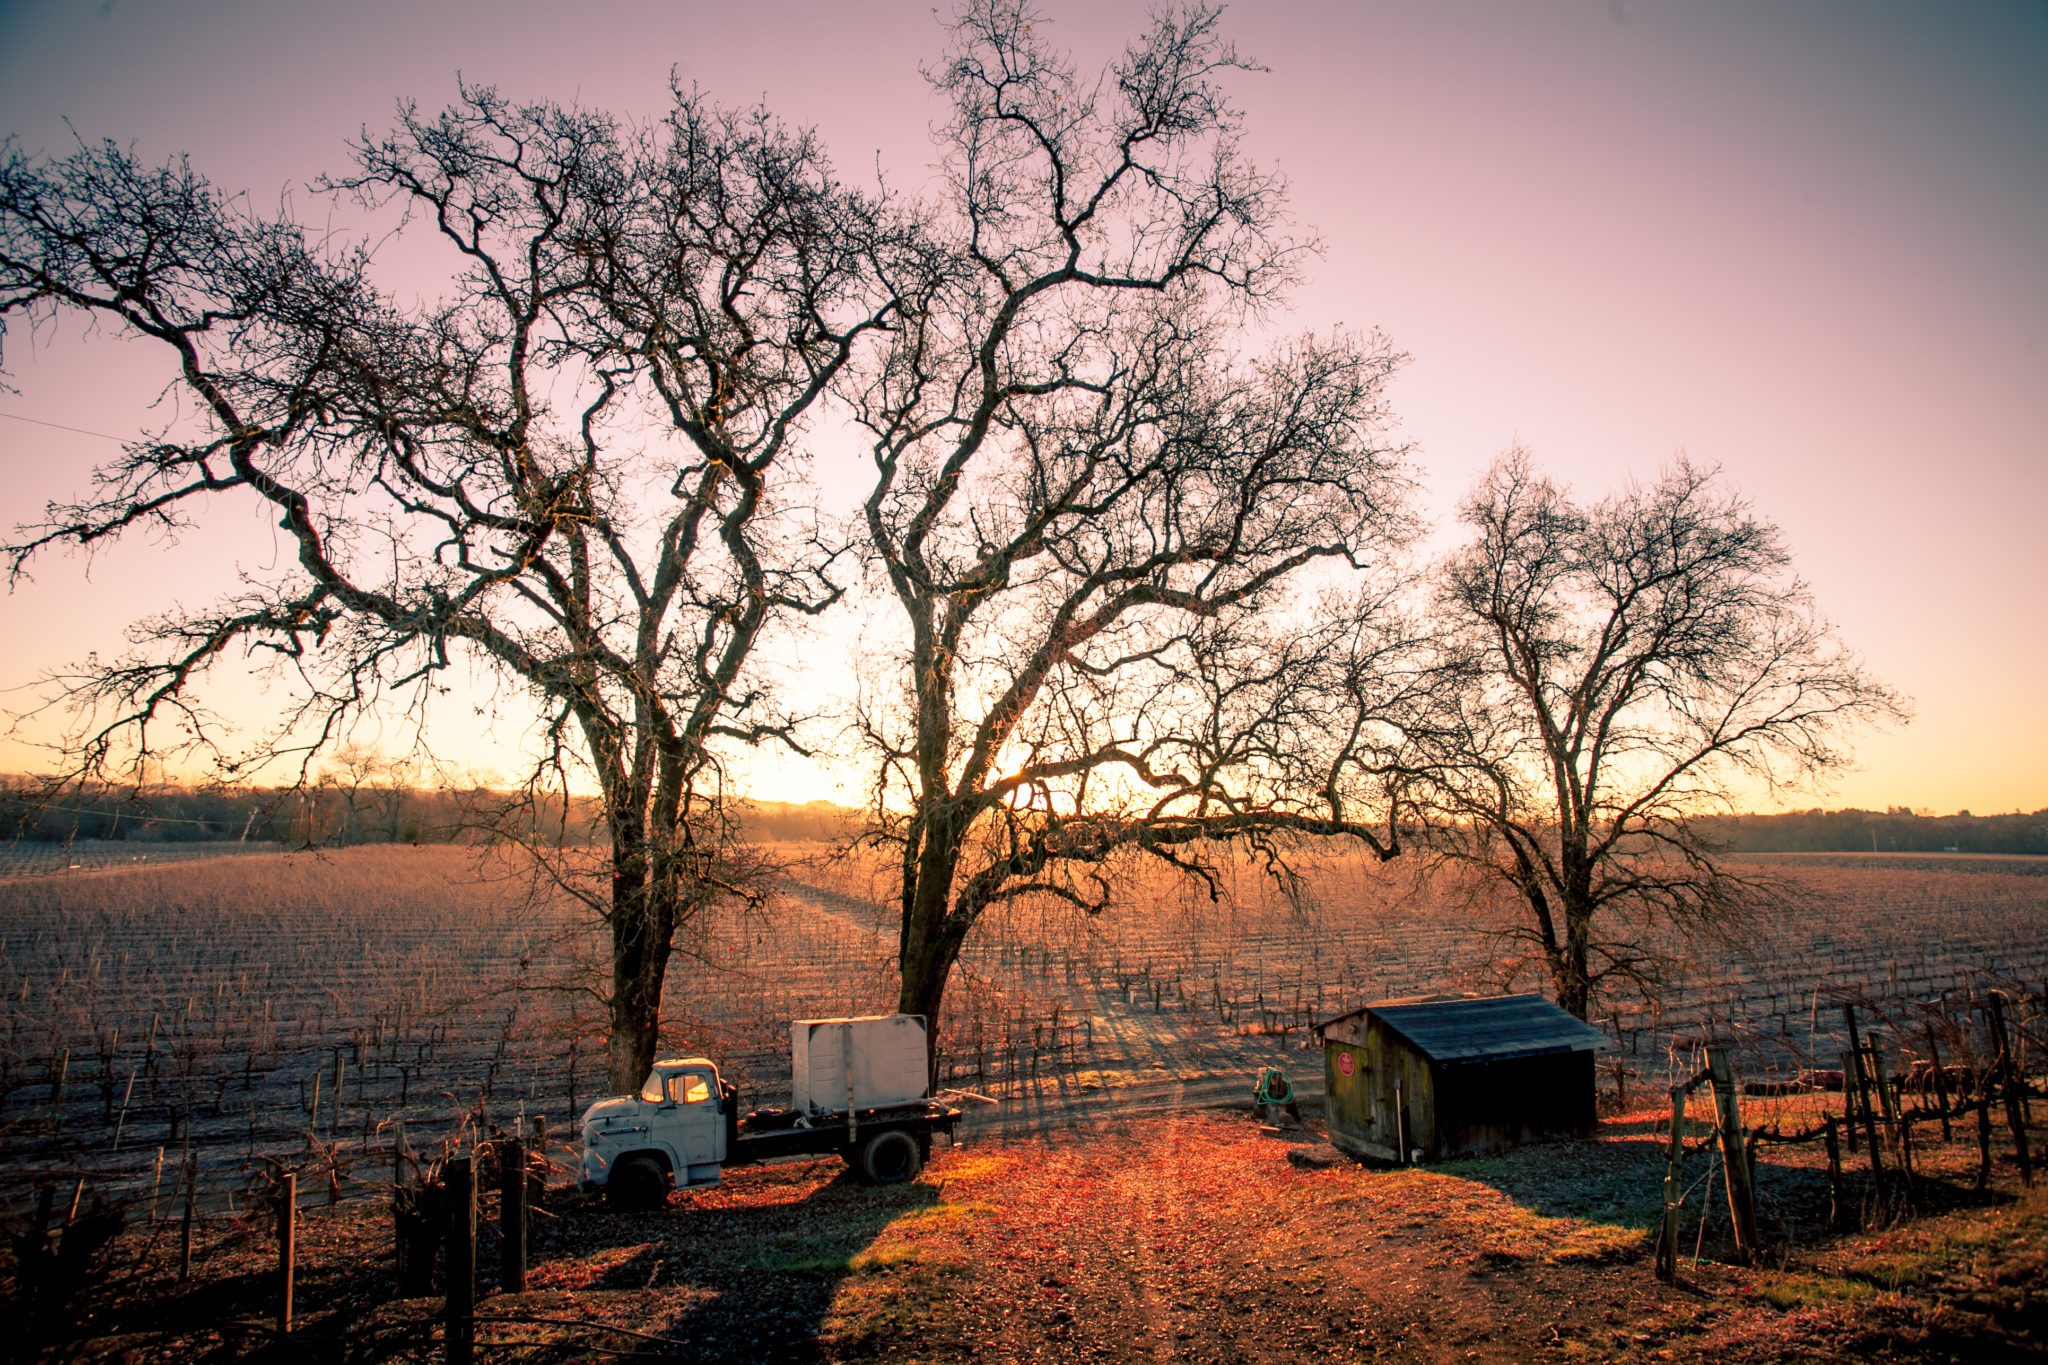 Autumn leaves on ground in front of bare oak trees and vineyard at sunset. 